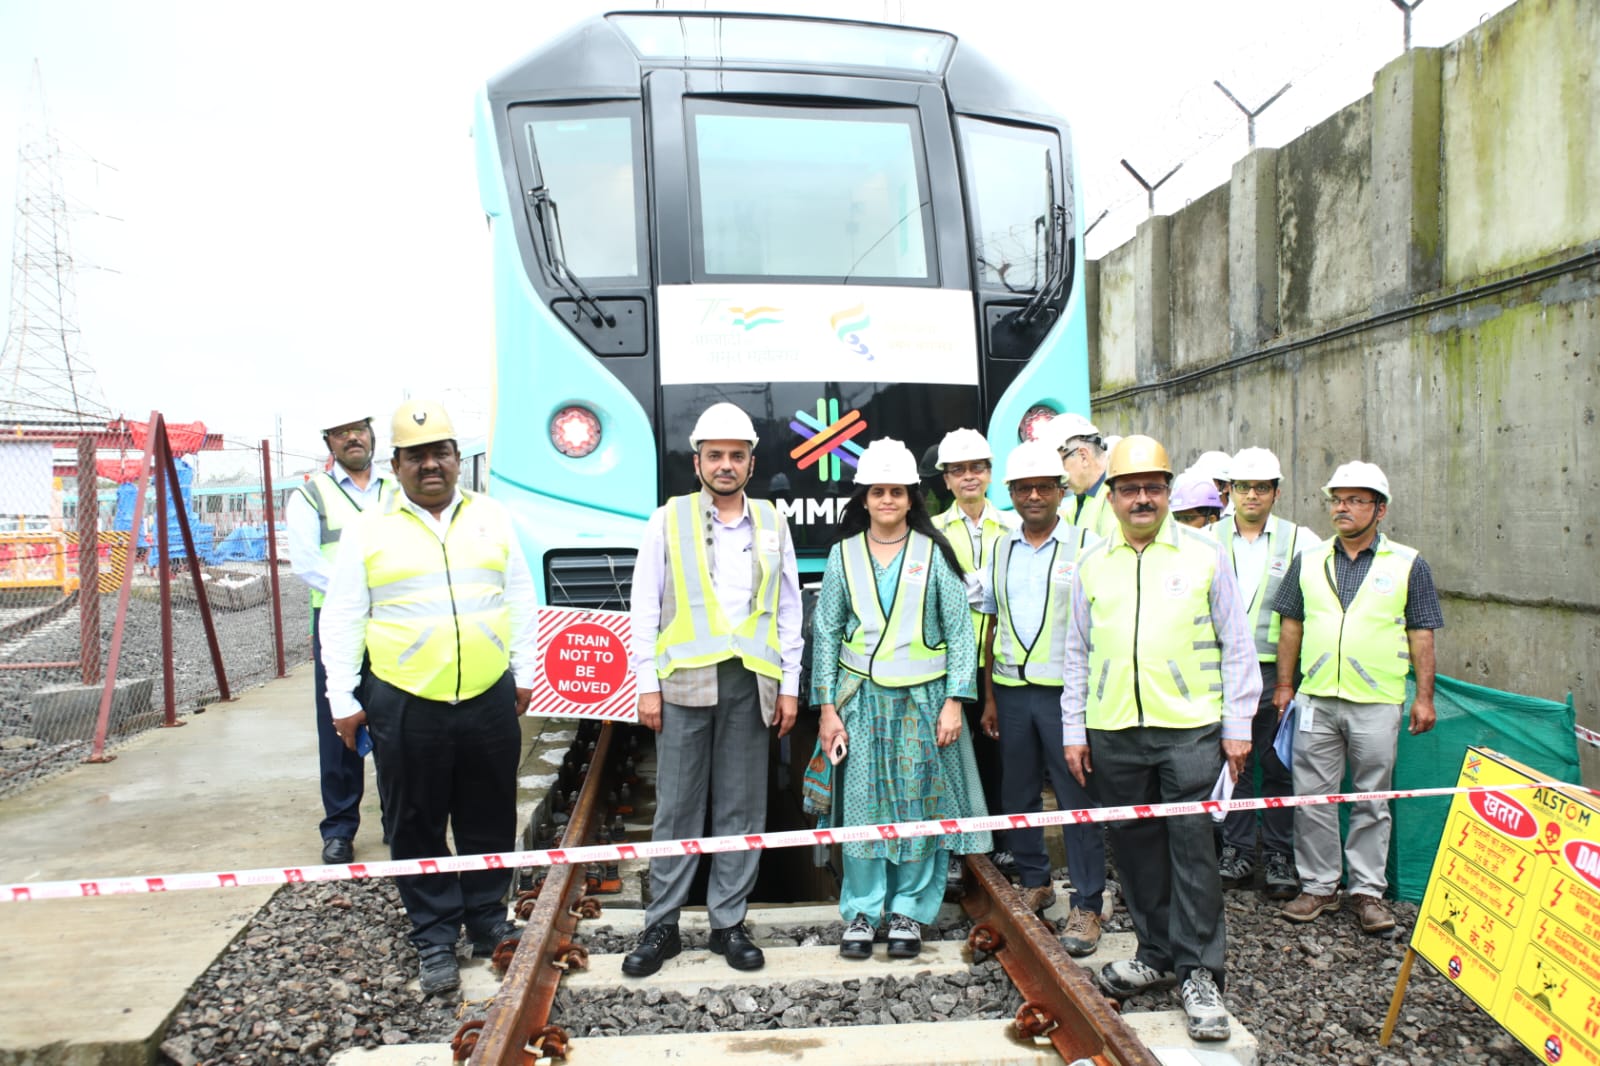 Progress of stations, tunnels, and other associated works of Mumbai Metro Line 3